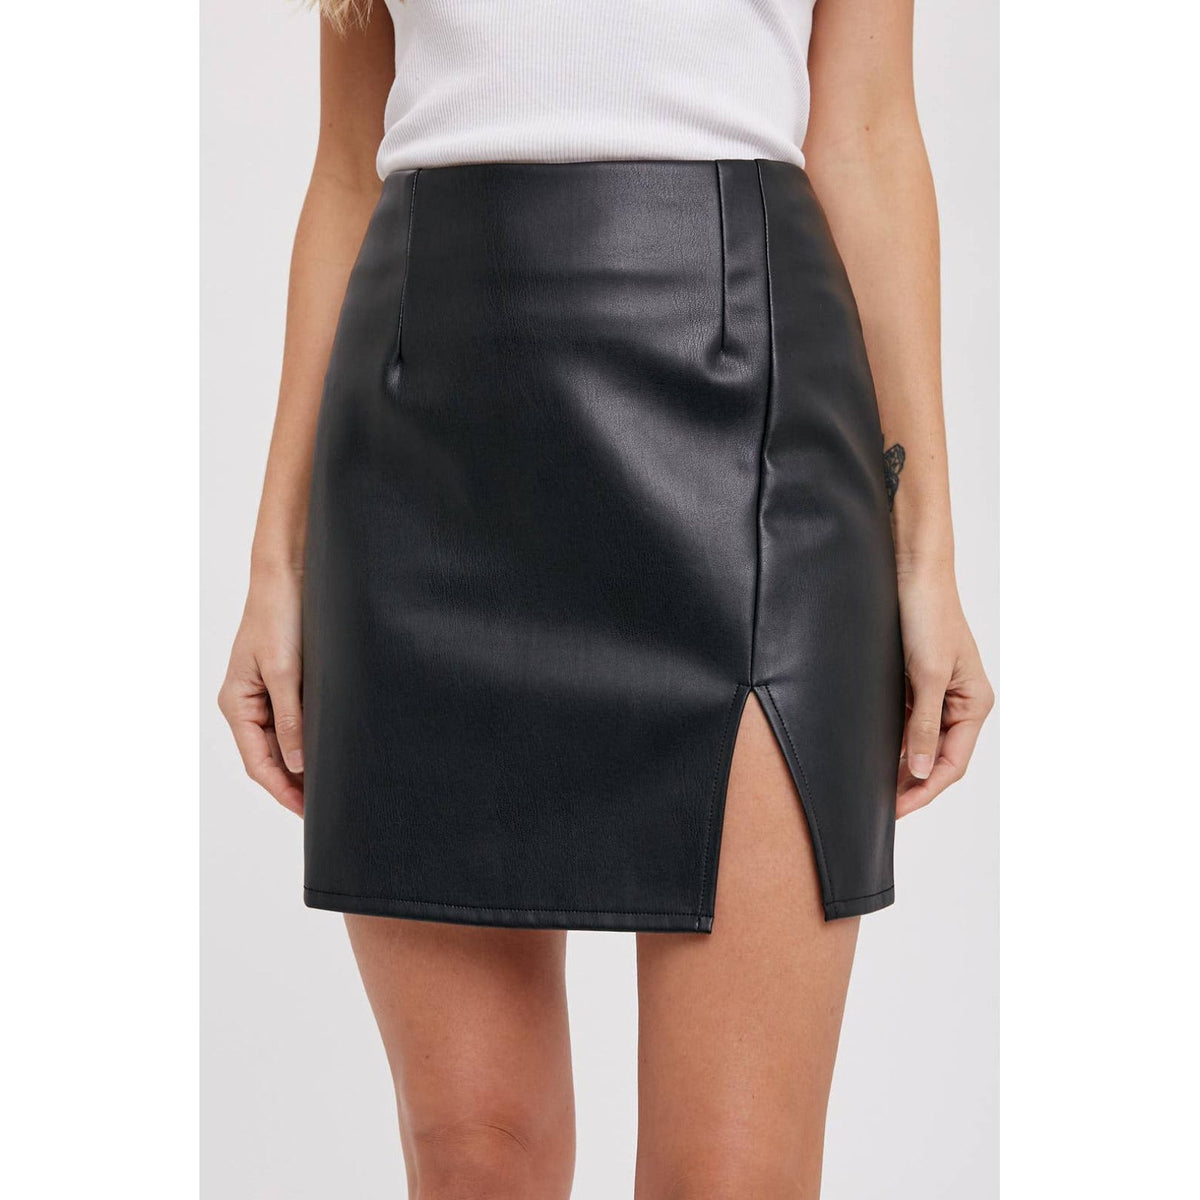 Black faux leather mini skirt with slit; womens clothing.